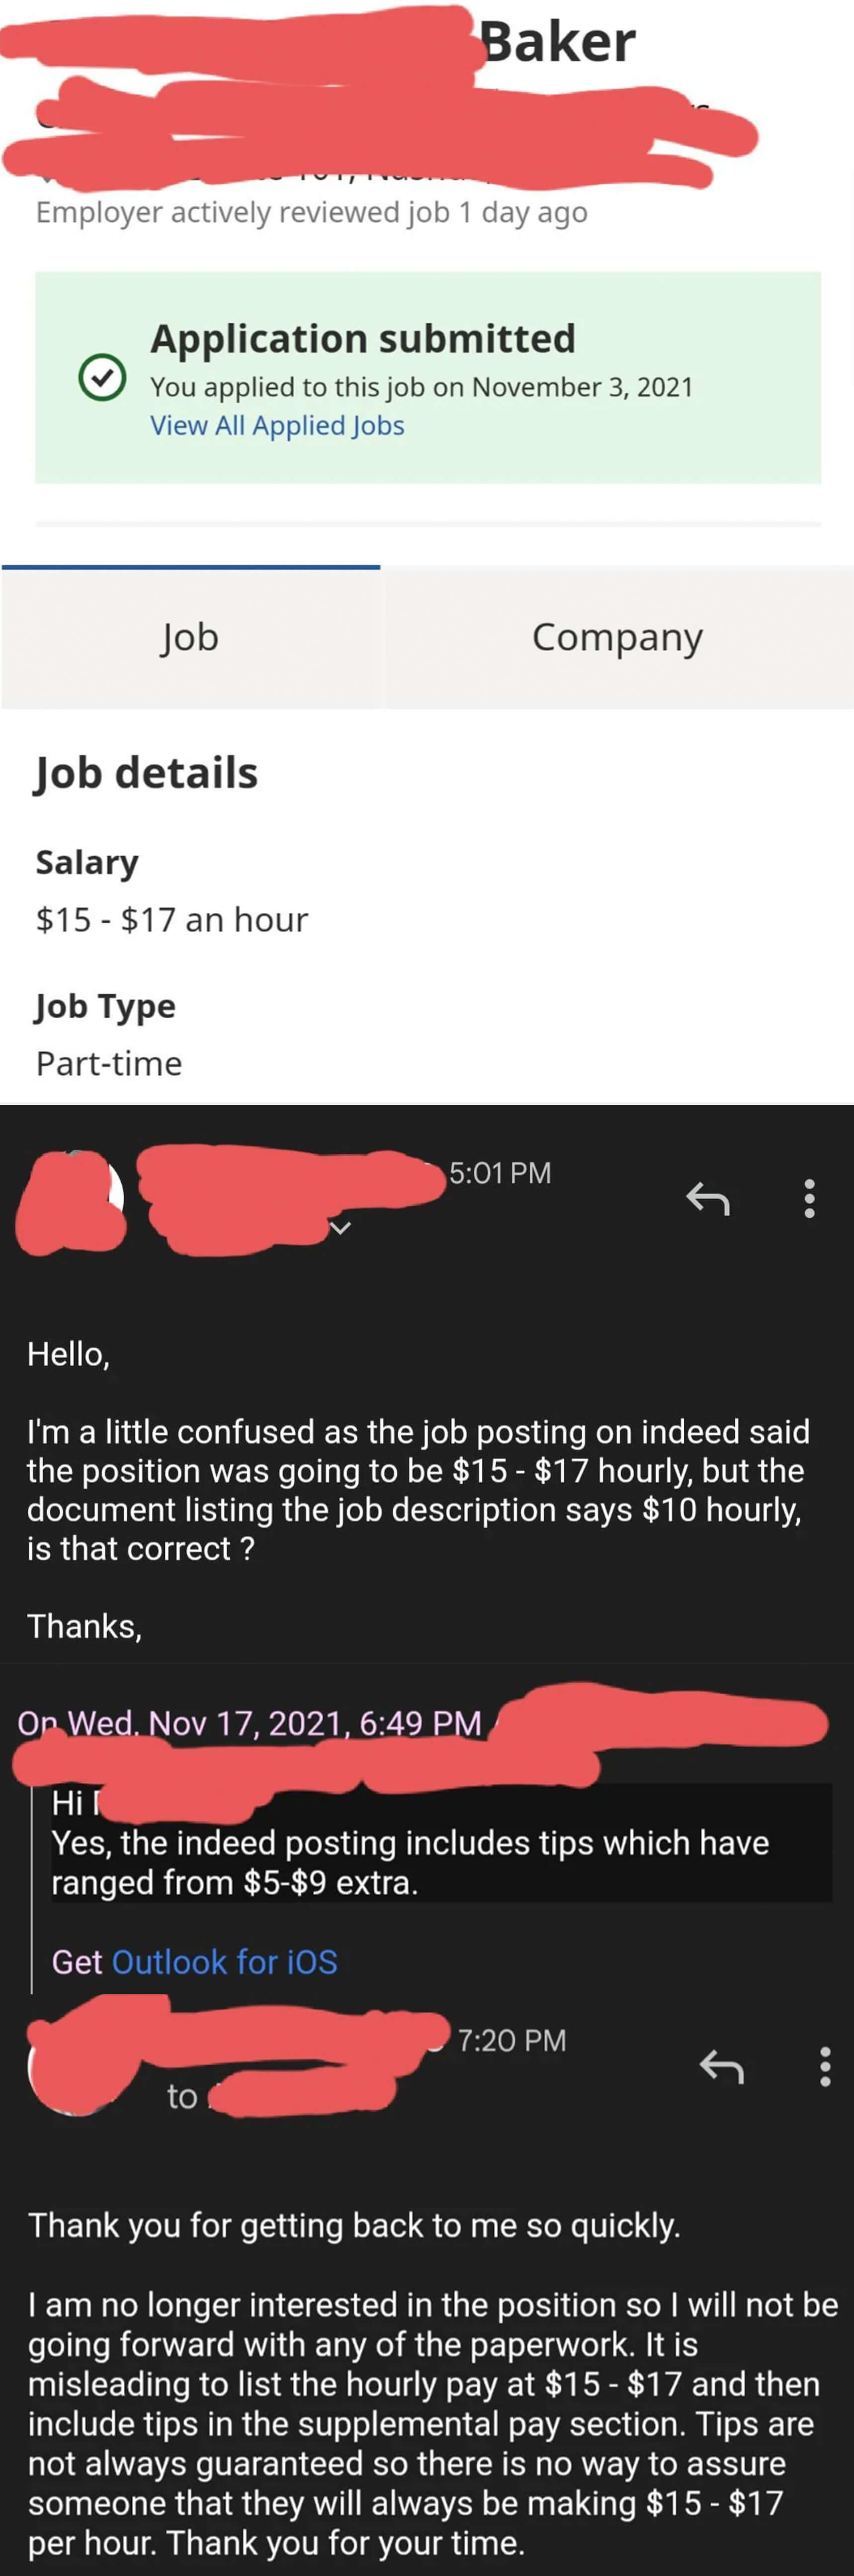 job posting advertises $15-17 an hour then messages clarify it&#x27;s actually $10, but you can expect tips. the person replies saying tips aren&#x27;t guaranteed and they&#x27;re no longer interested